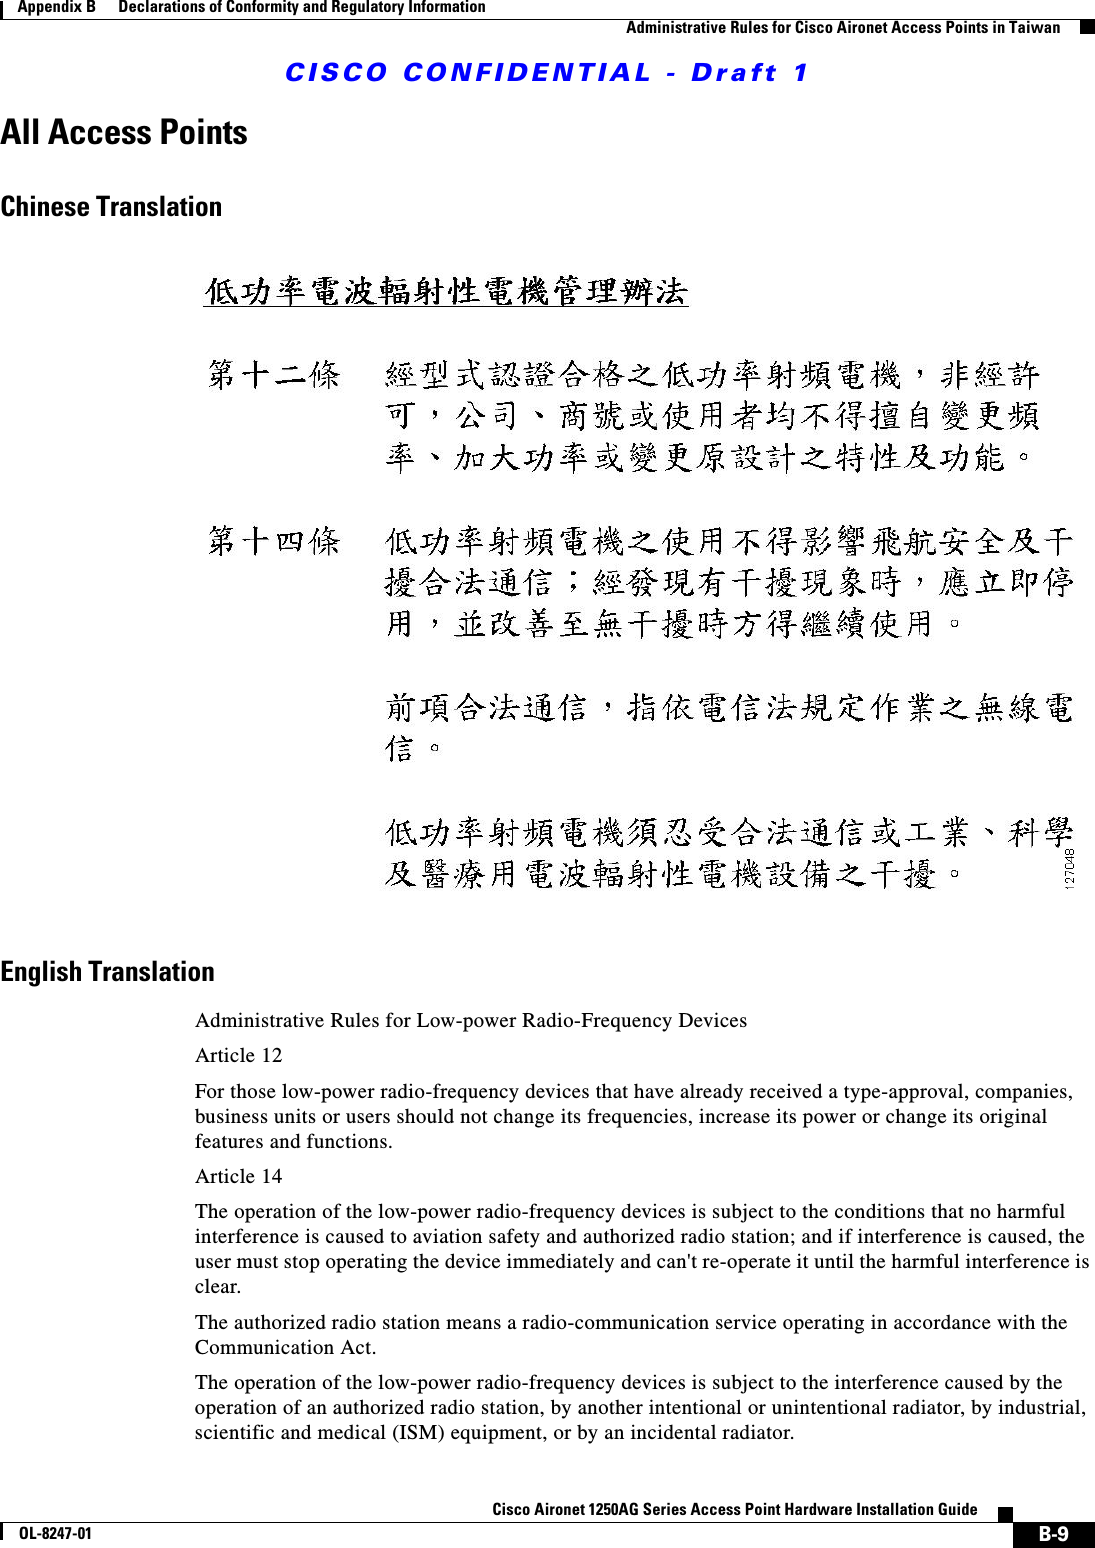 CISCO CONFIDENTIAL - Draft 1B-9Cisco Aironet 1250AG Series Access Point Hardware Installation GuideOL-8247-01Appendix B      Declarations of Conformity and Regulatory InformationAdministrative Rules for Cisco Aironet Access Points in TaiwanAll Access PointsChinese TranslationEnglish TranslationAdministrative Rules for Low-power Radio-Frequency DevicesArticle 12For those low-power radio-frequency devices that have already received a type-approval, companies, business units or users should not change its frequencies, increase its power or change its original features and functions.Article 14The operation of the low-power radio-frequency devices is subject to the conditions that no harmful interference is caused to aviation safety and authorized radio station; and if interference is caused, the user must stop operating the device immediately and can&apos;t re-operate it until the harmful interference is clear.The authorized radio station means a radio-communication service operating in accordance with the Communication Act. The operation of the low-power radio-frequency devices is subject to the interference caused by the operation of an authorized radio station, by another intentional or unintentional radiator, by industrial, scientific and medical (ISM) equipment, or by an incidental radiator. 